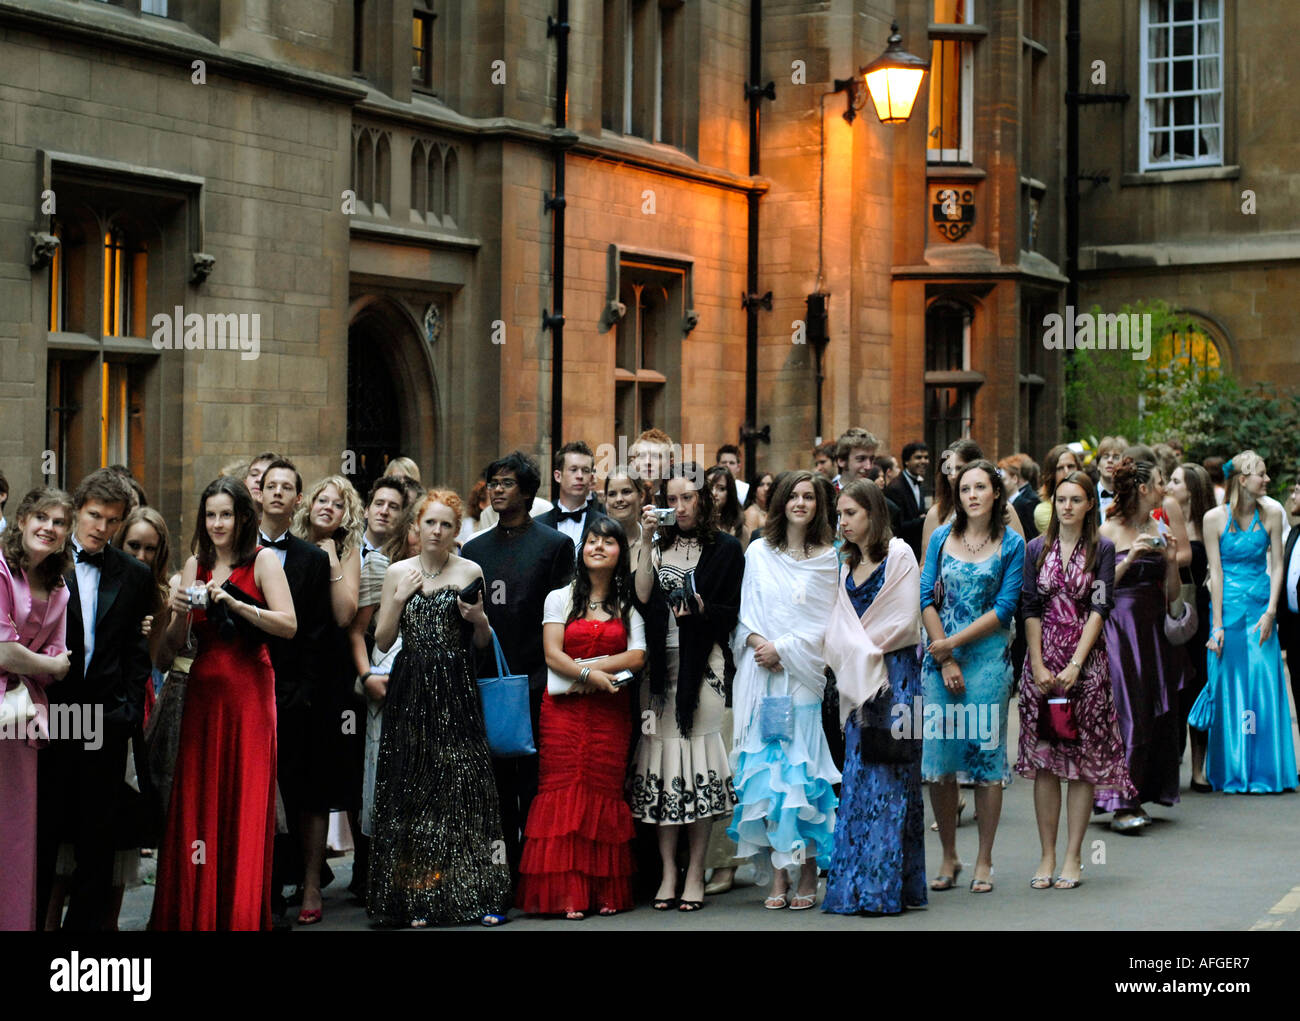 Queuing to enter the Clare College May Ball in Cambridge, England Stock Photo